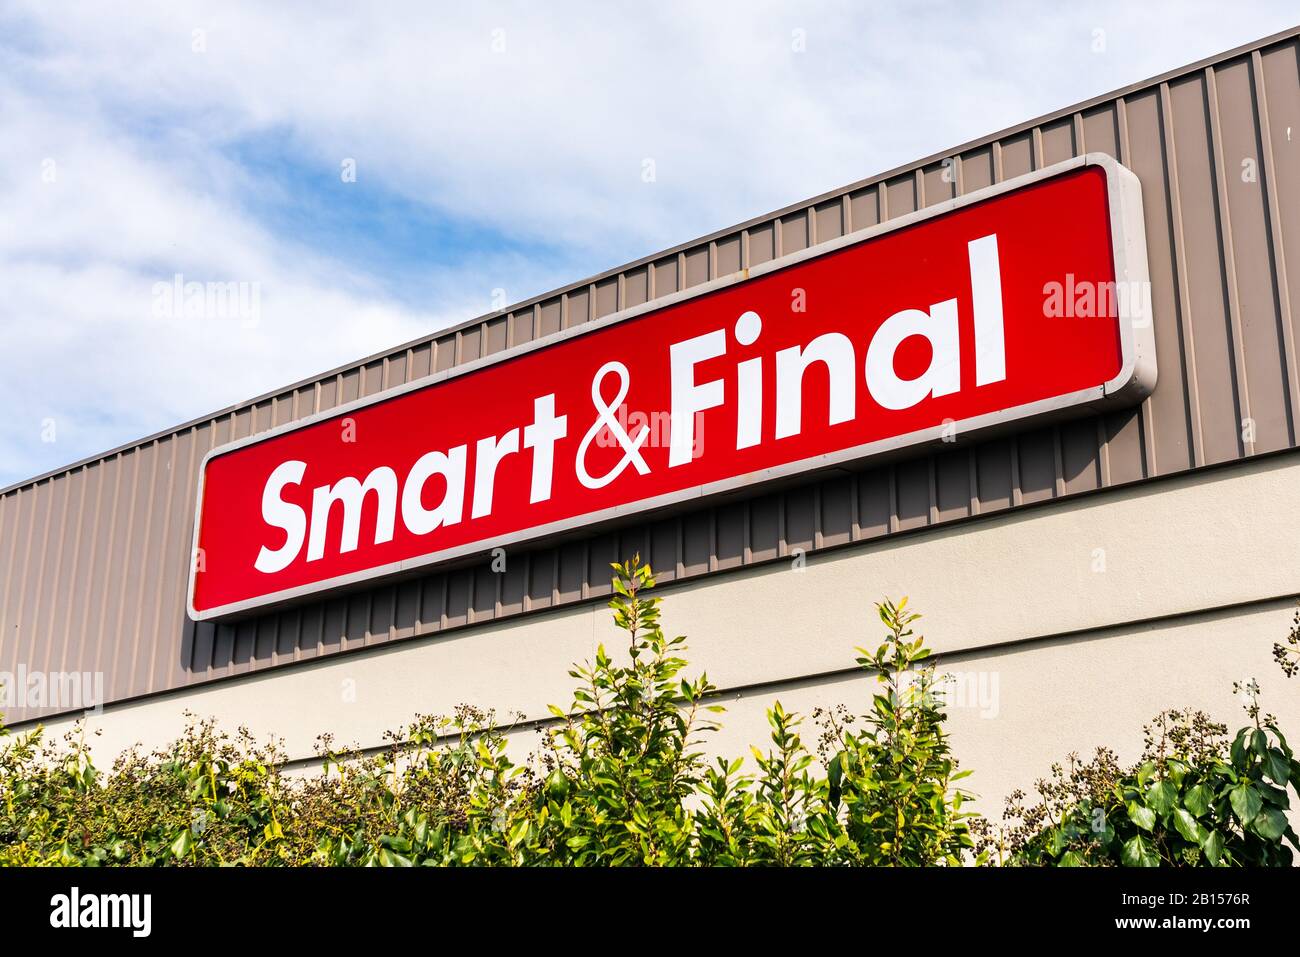 Feb 21, 2020 Redwood City / CA / USA - Smart & Final logo on the facade of one of their locations; Smart & Final is a chain of warehouse-style food an Stock Photo